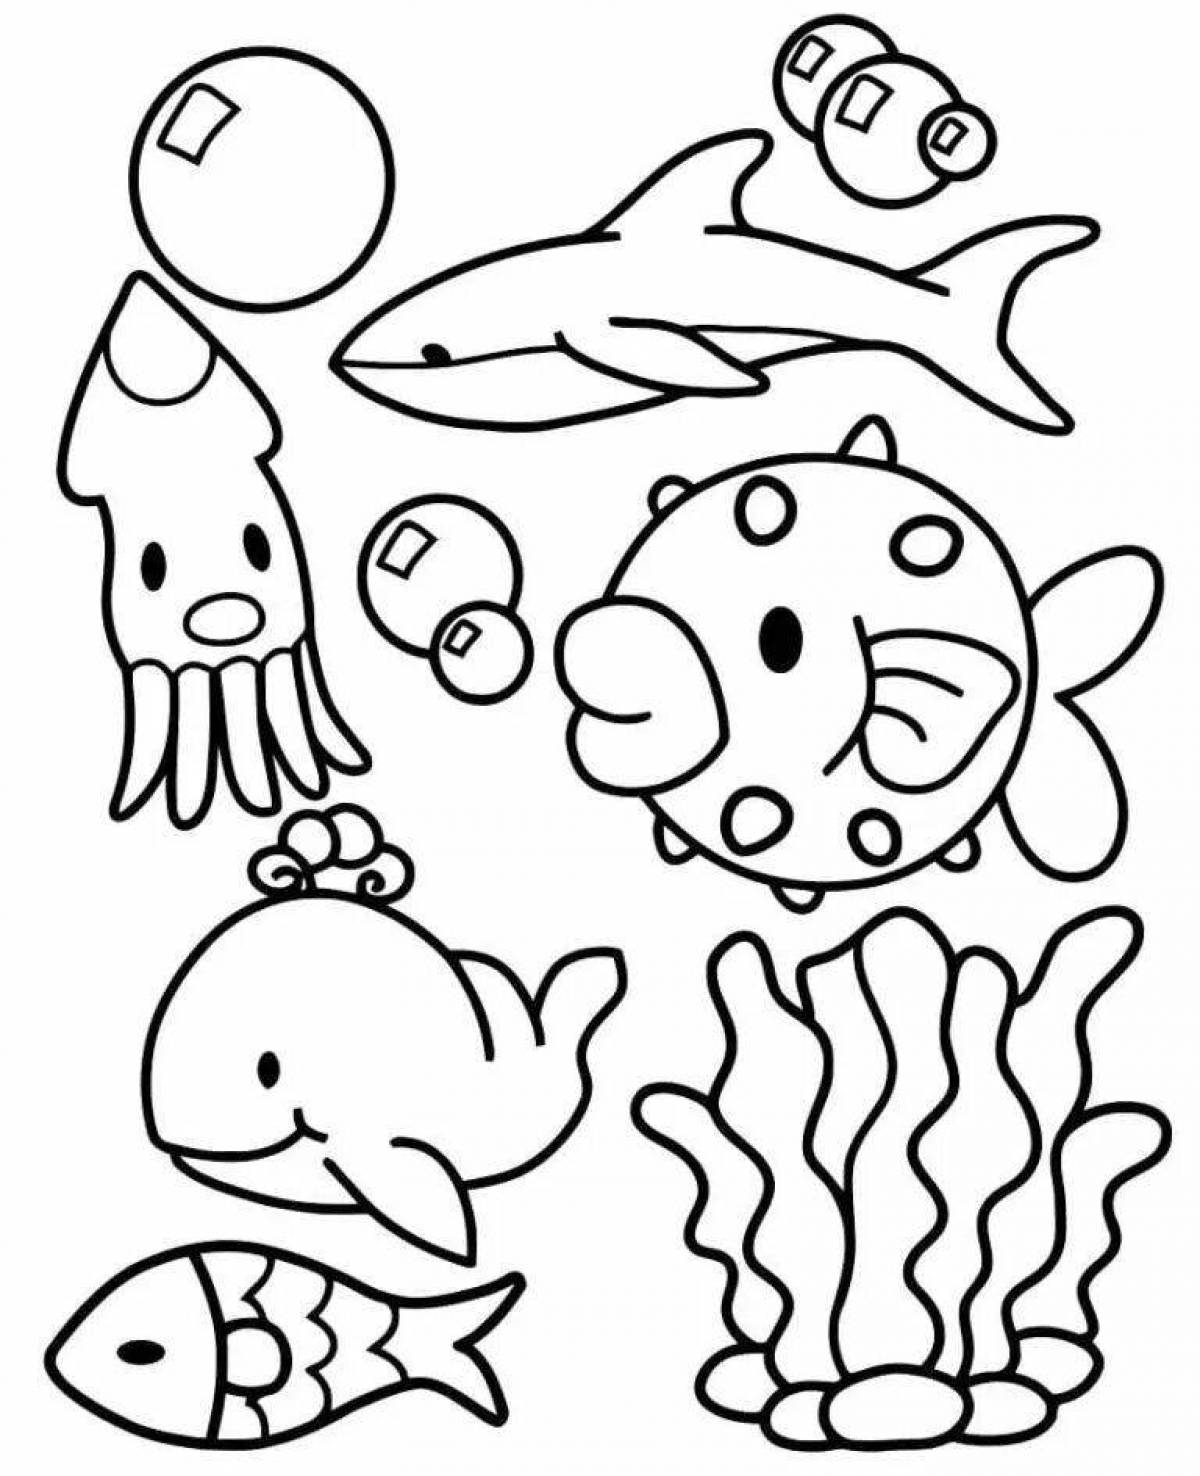 Playful sea animals coloring page for kids